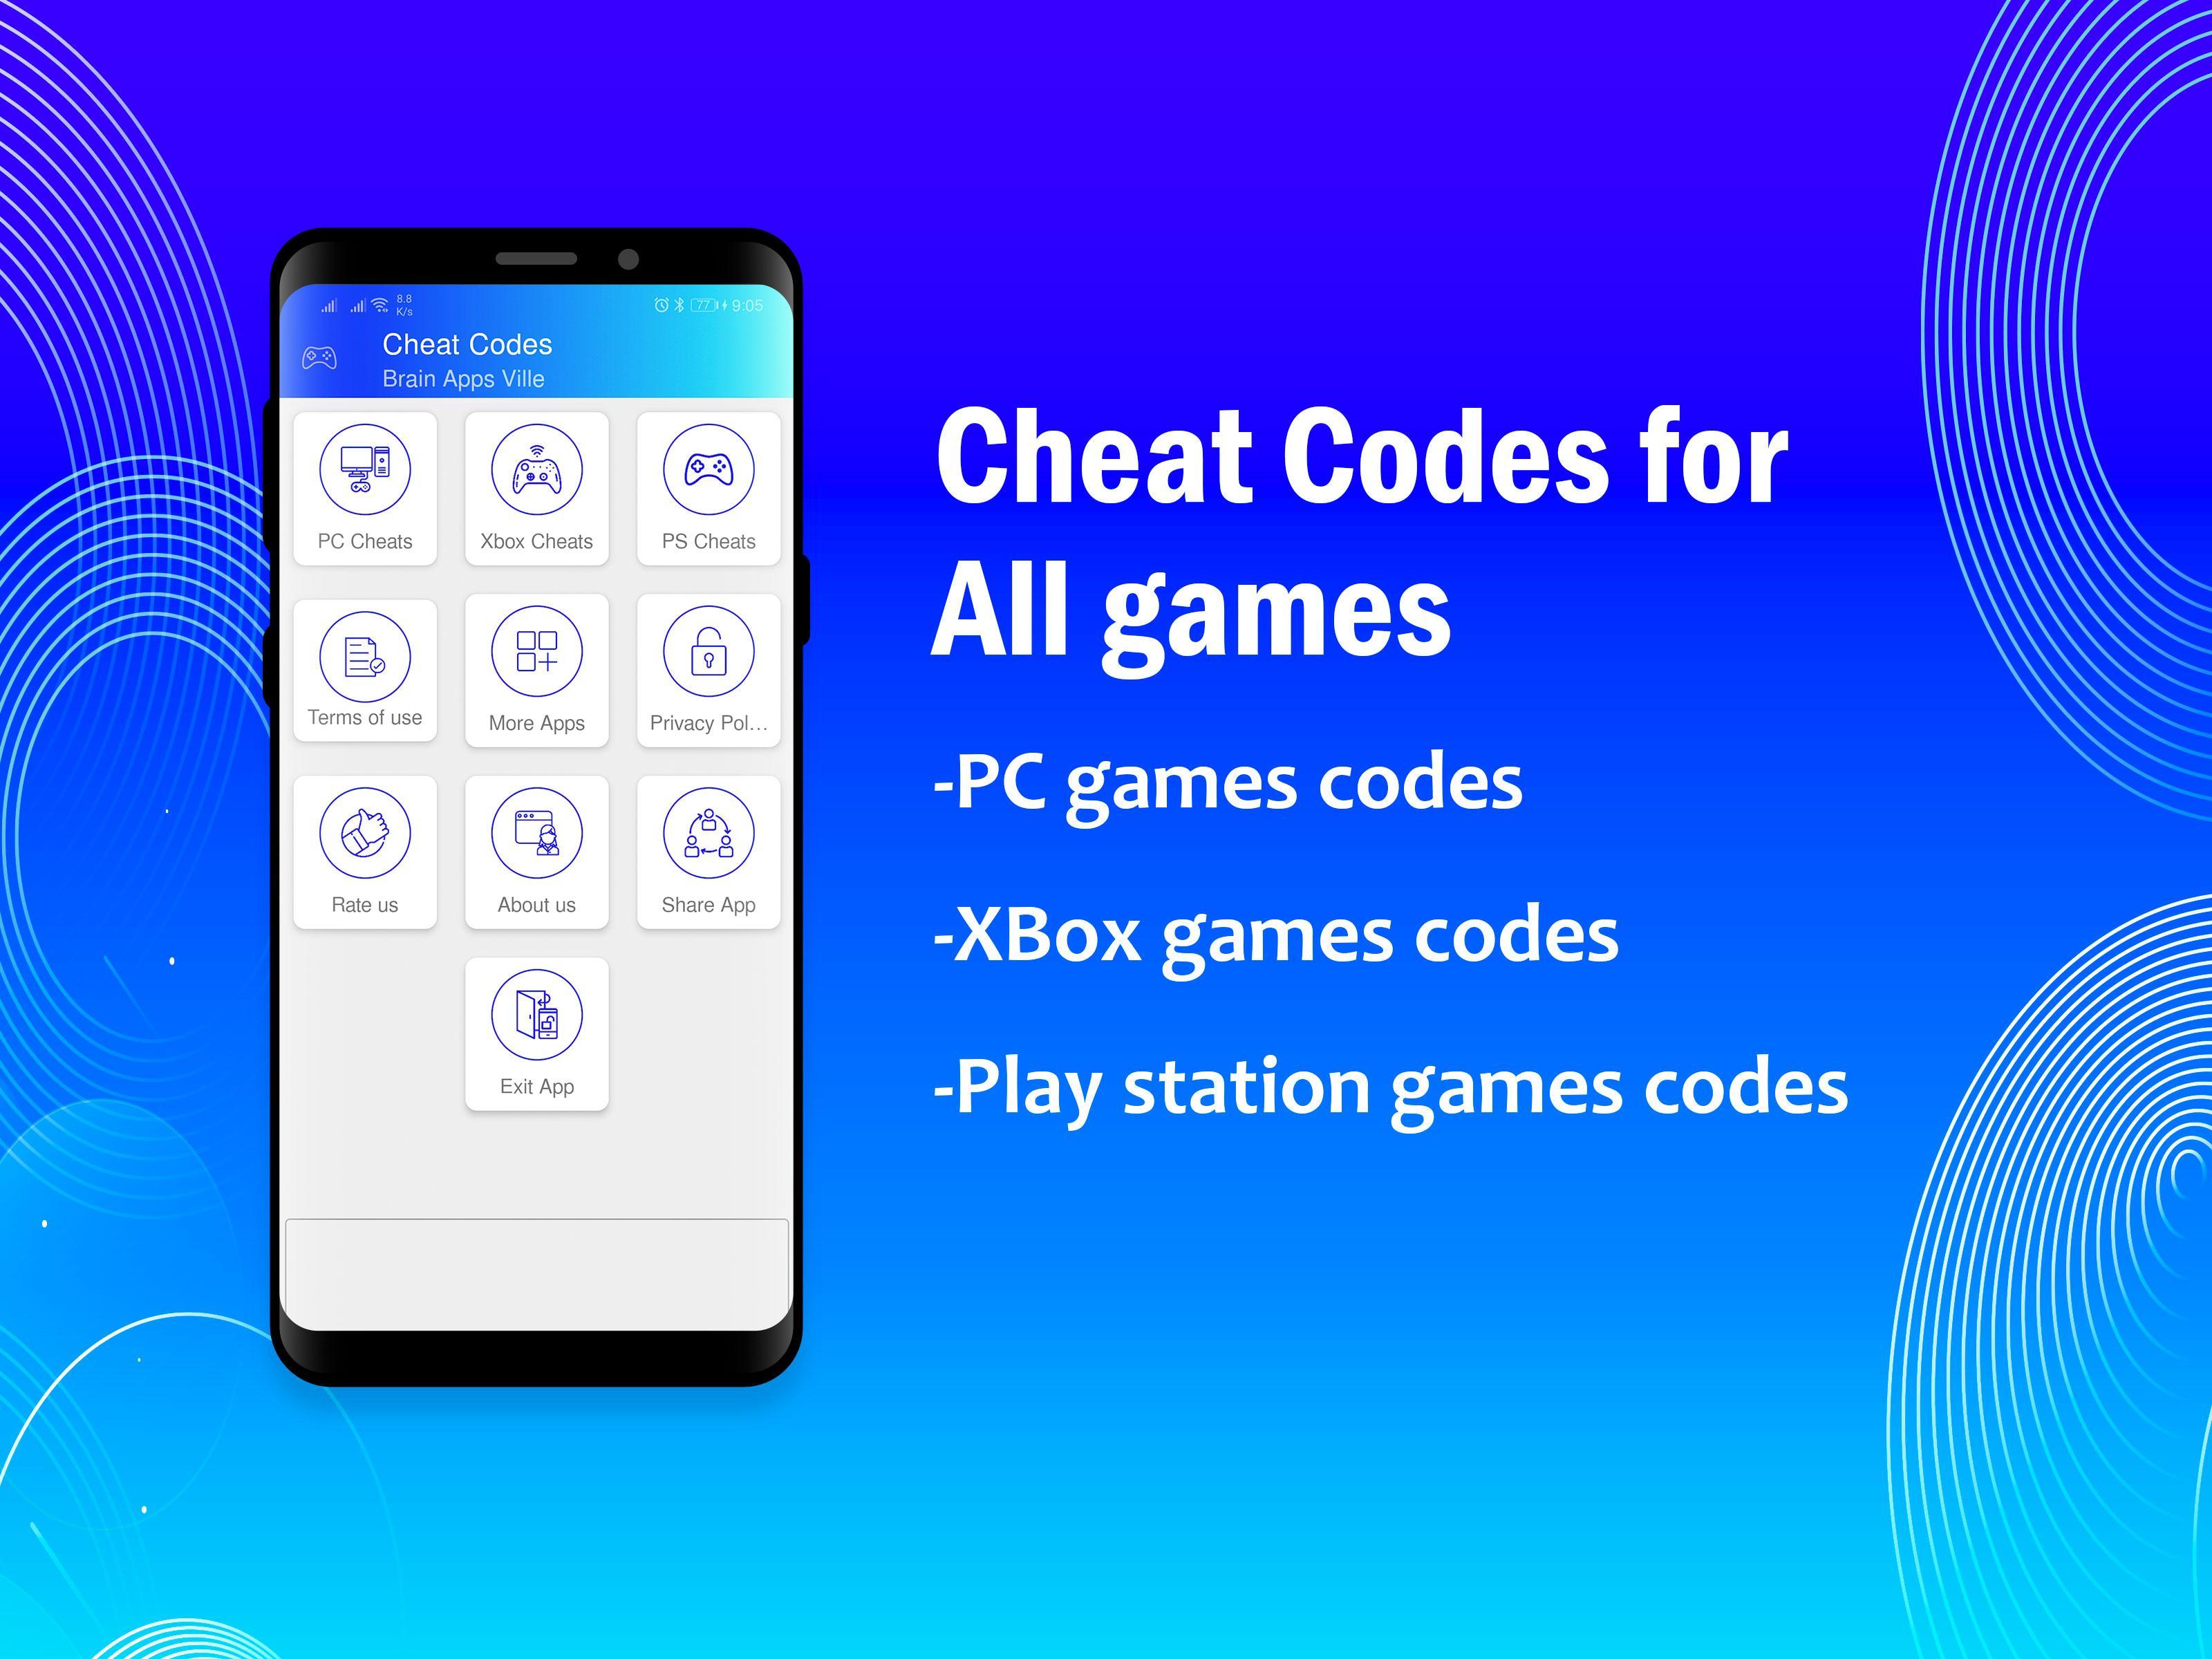 Cheats for games. Cheat codes. Android code. My games Cheats.